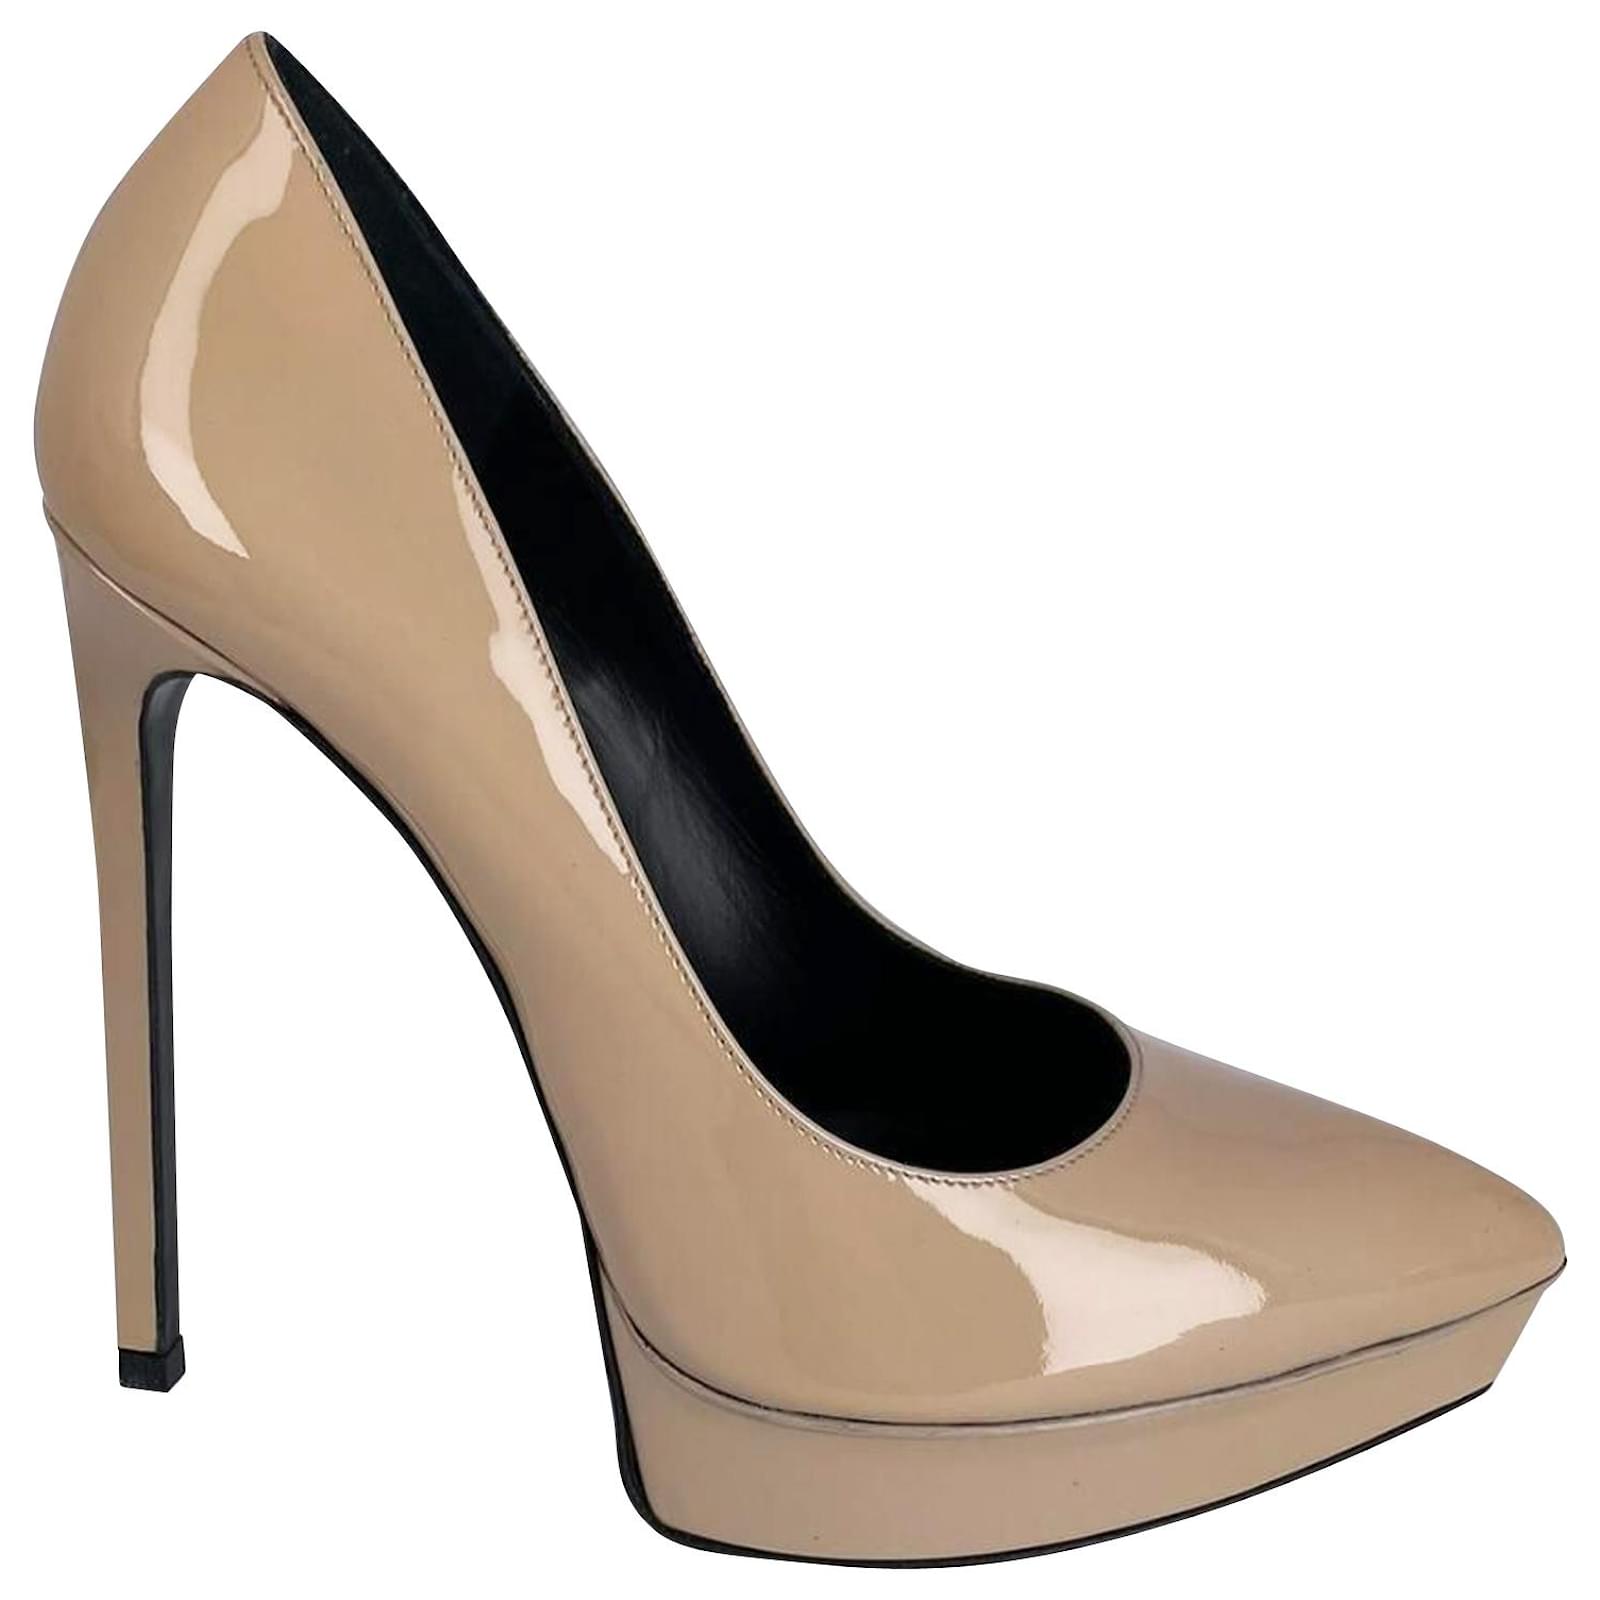 Yves Saint Laurent Janis Heels in Nude Patent Flesh Leather Patent